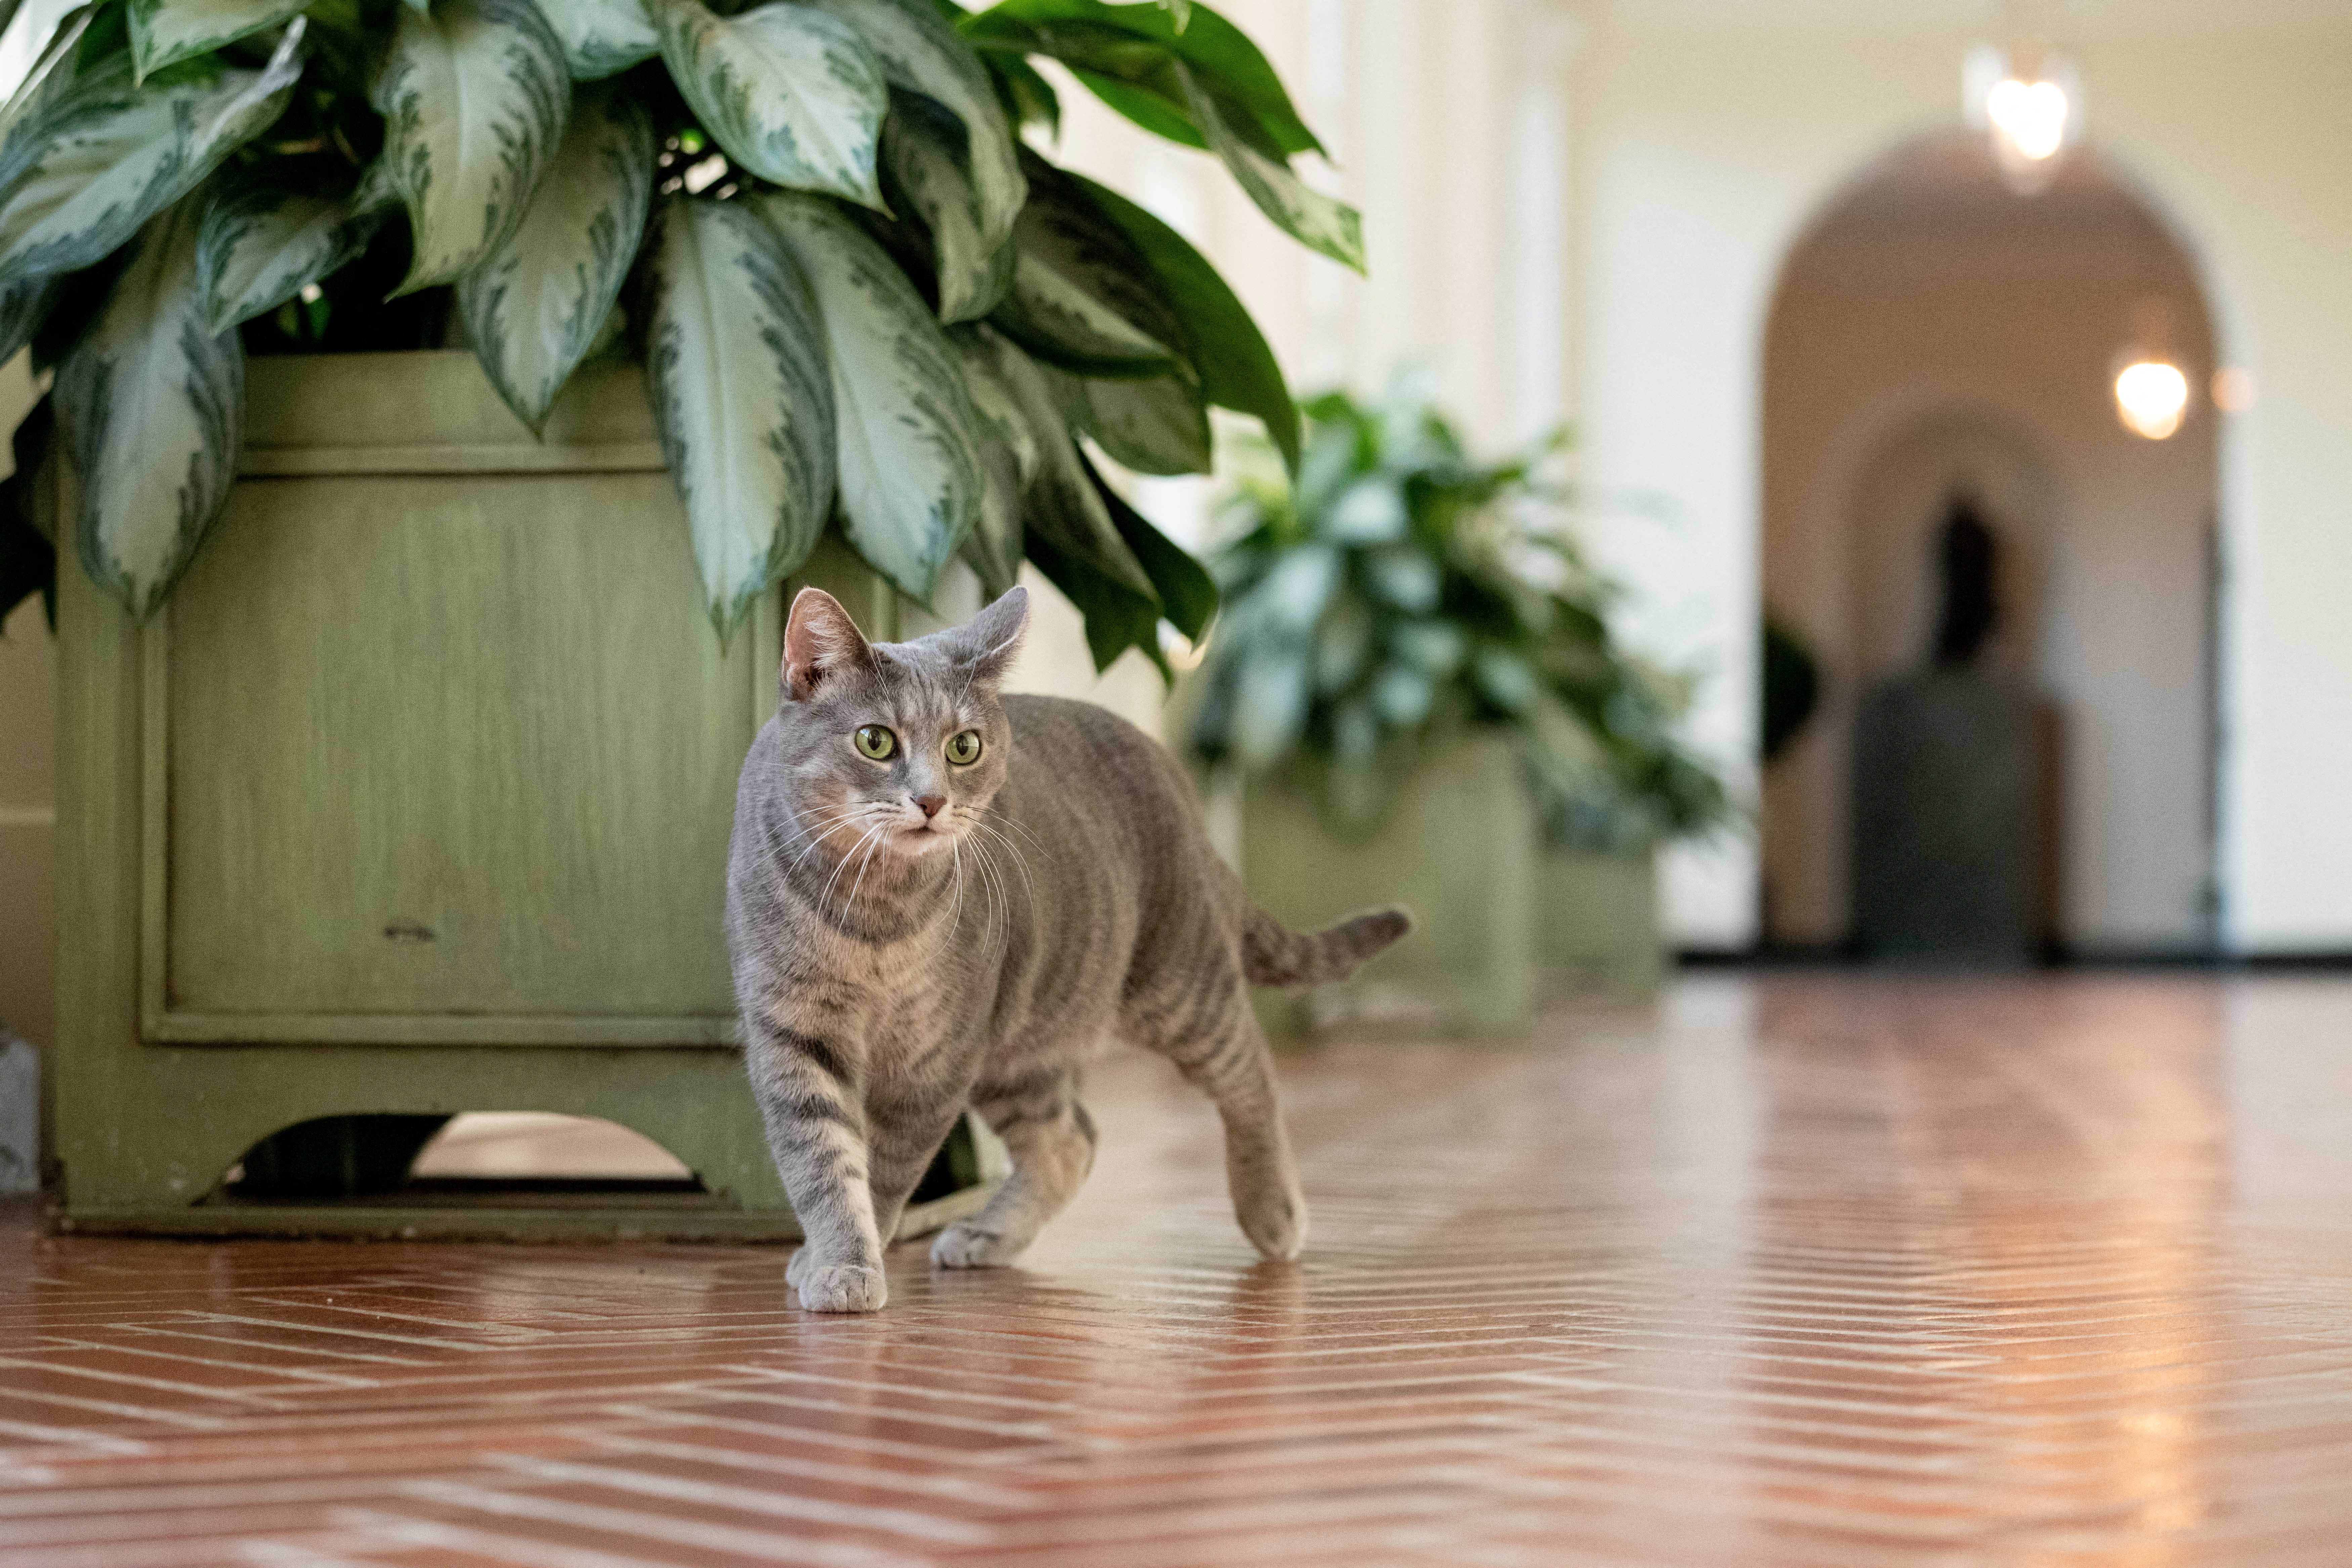 Willow, U.S. President Joe Biden and first lady Jill Biden’s new pet cat, is seen in a White House handout photo as she wanders through the halls of the White House in Washington, U.S., January 27, 2022. Picture taken January 27, 2022. Erin Scott/The White House/Handout via REUTERS